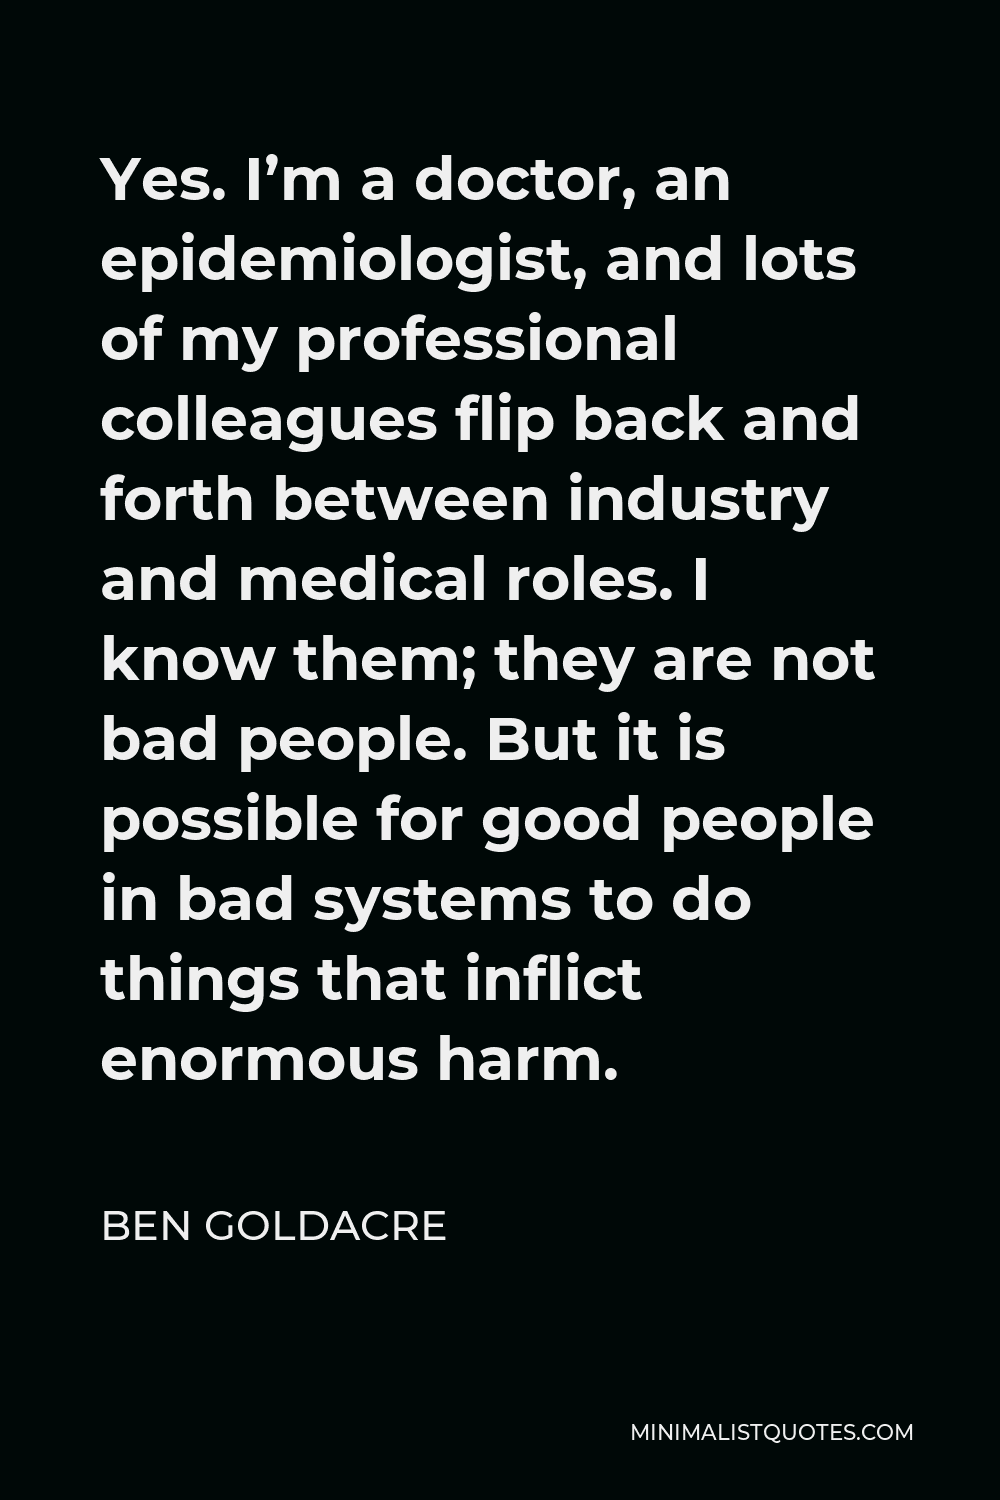 Ben Goldacre Quote - Yes. I’m a doctor, an epidemiologist, and lots of my professional colleagues flip back and forth between industry and medical roles. I know them; they are not bad people. But it is possible for good people in bad systems to do things that inflict enormous harm.